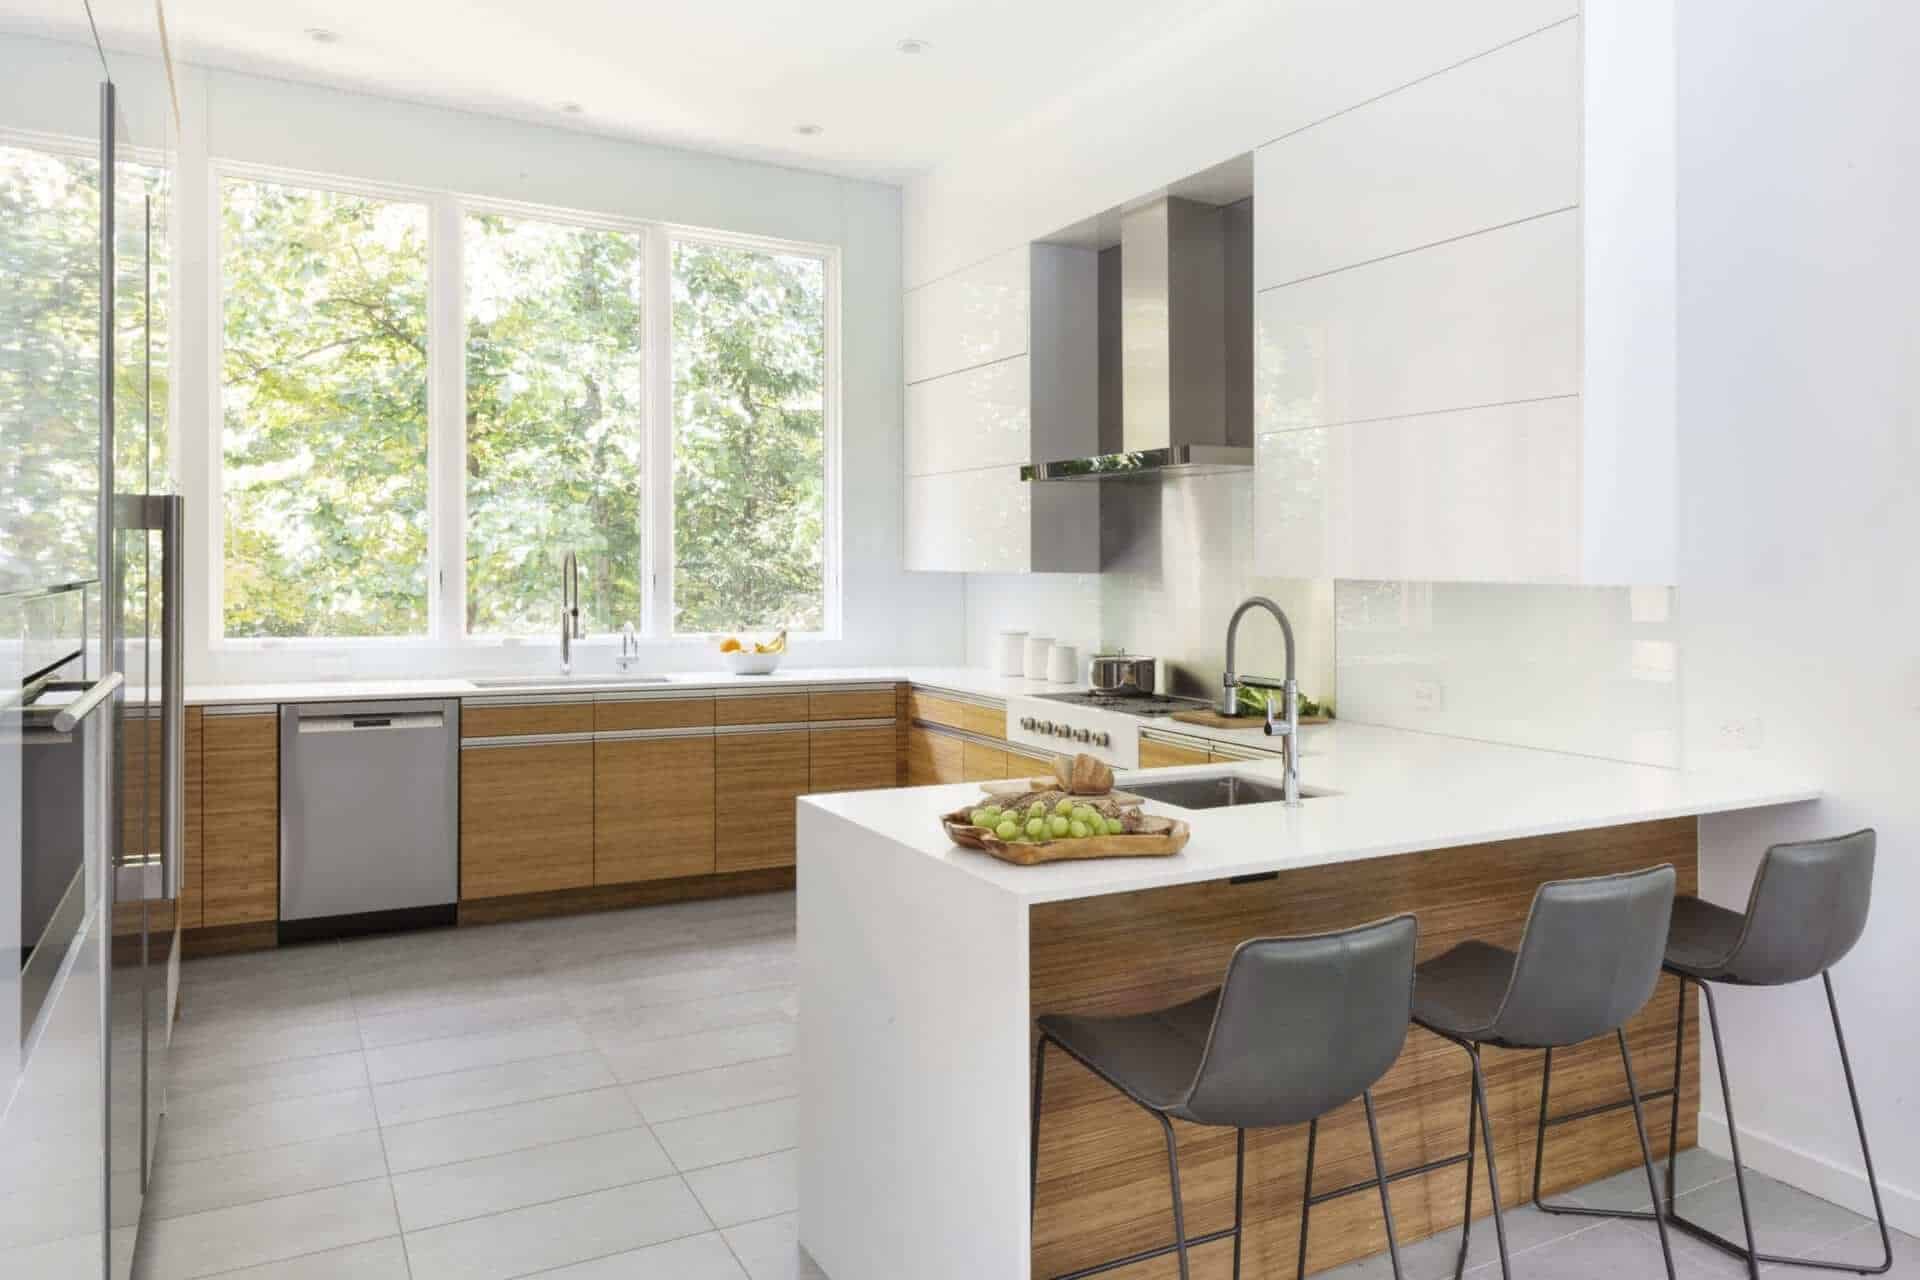 U-shaped modern kitchen features NAC flat front cabinets, white Caesarstone quartz countertops and stainless appliances.